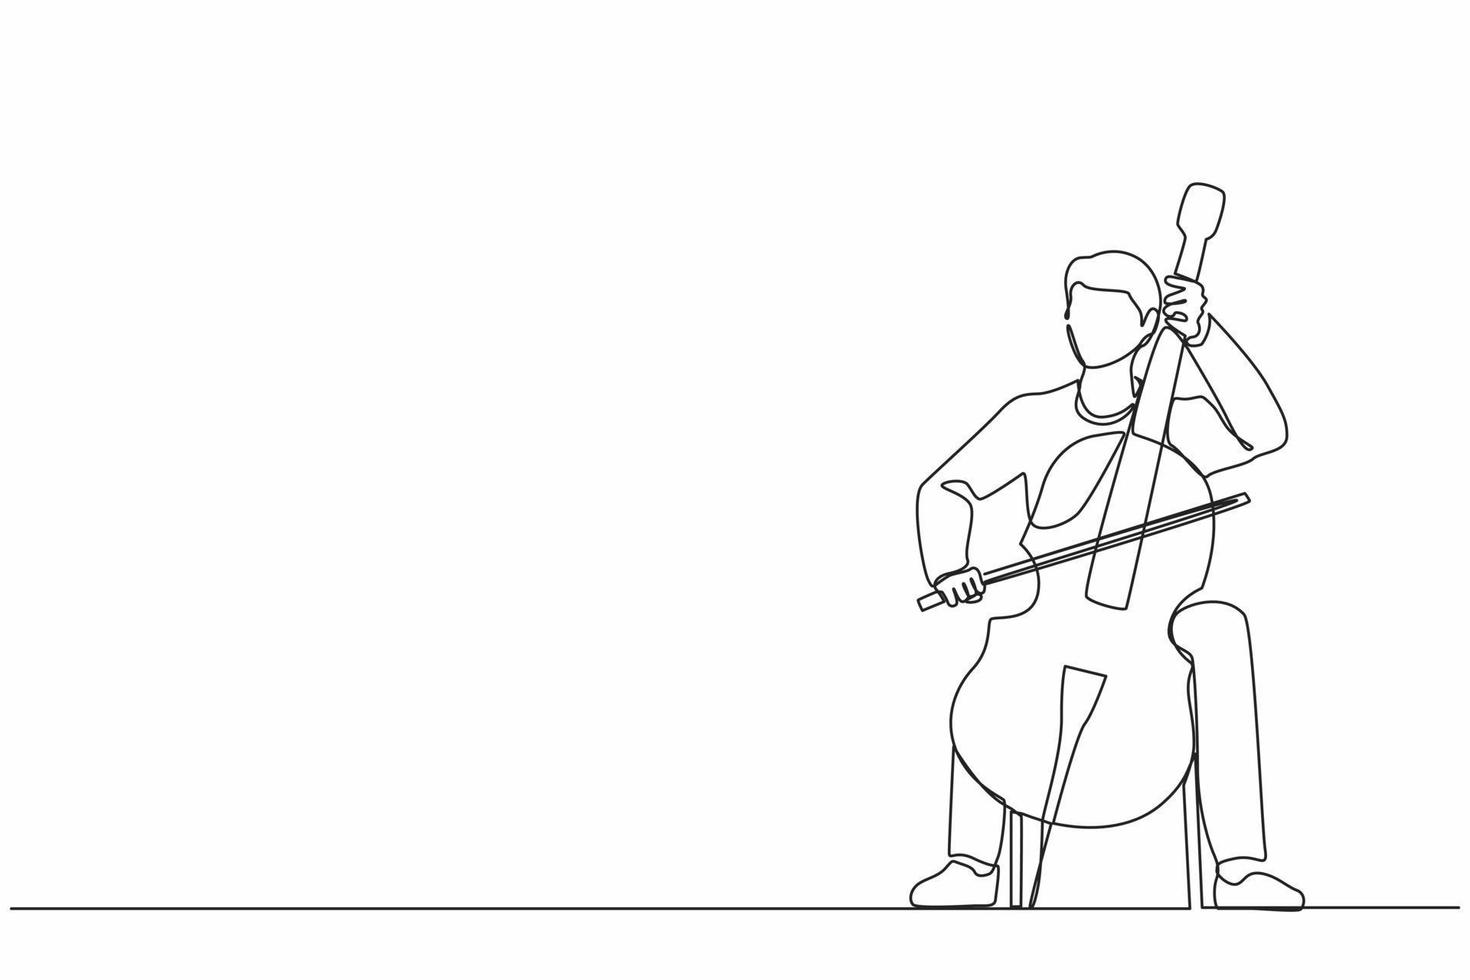 Single one line drawing young male performer playing on contrabass. Cellist man playing cello, musician playing classical music instrument. Continuous line draw design graphic vector illustration